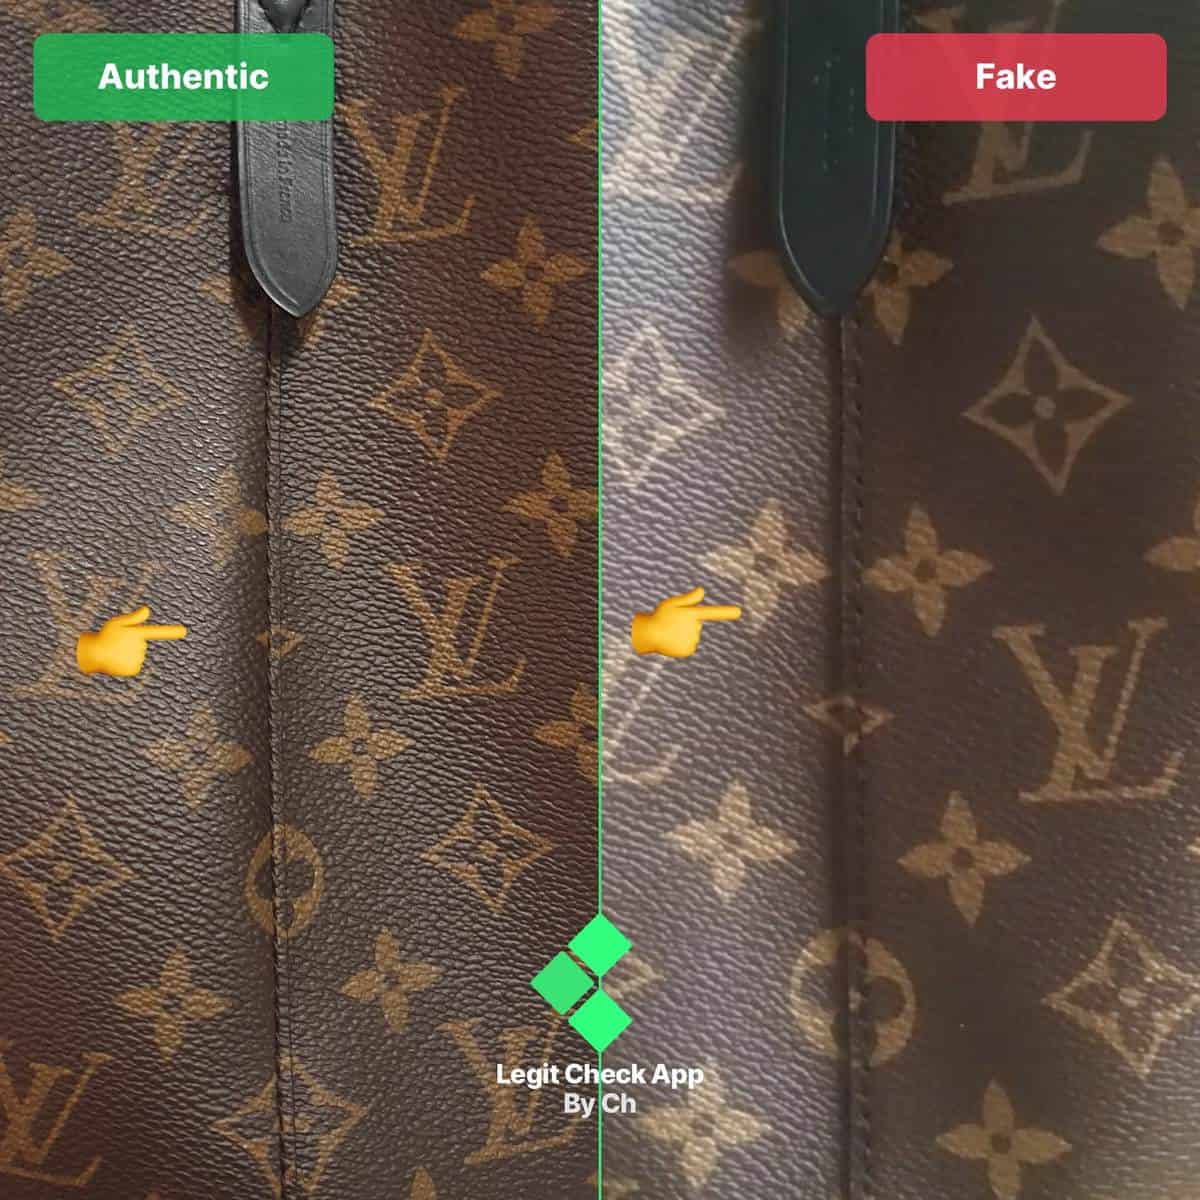 How to tell an AUTHENTIC Louis Vuitton bag from a FAKE one? - Look